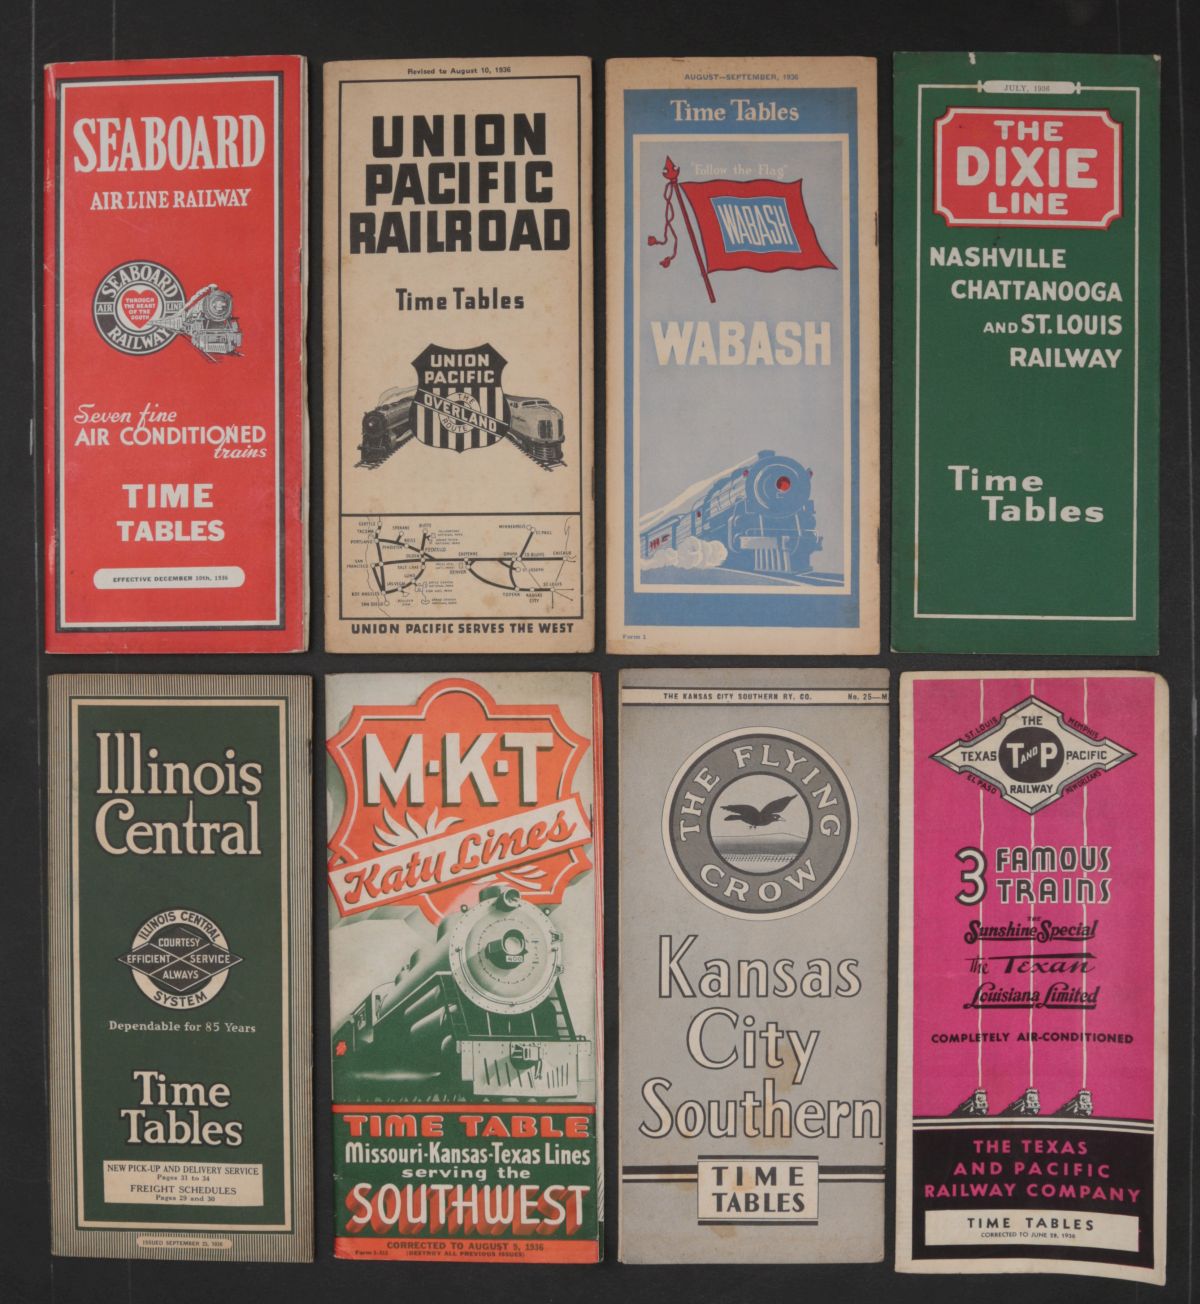 21 TIMETABLES FROM 15 DIFFERENT 1930s RAILROADS